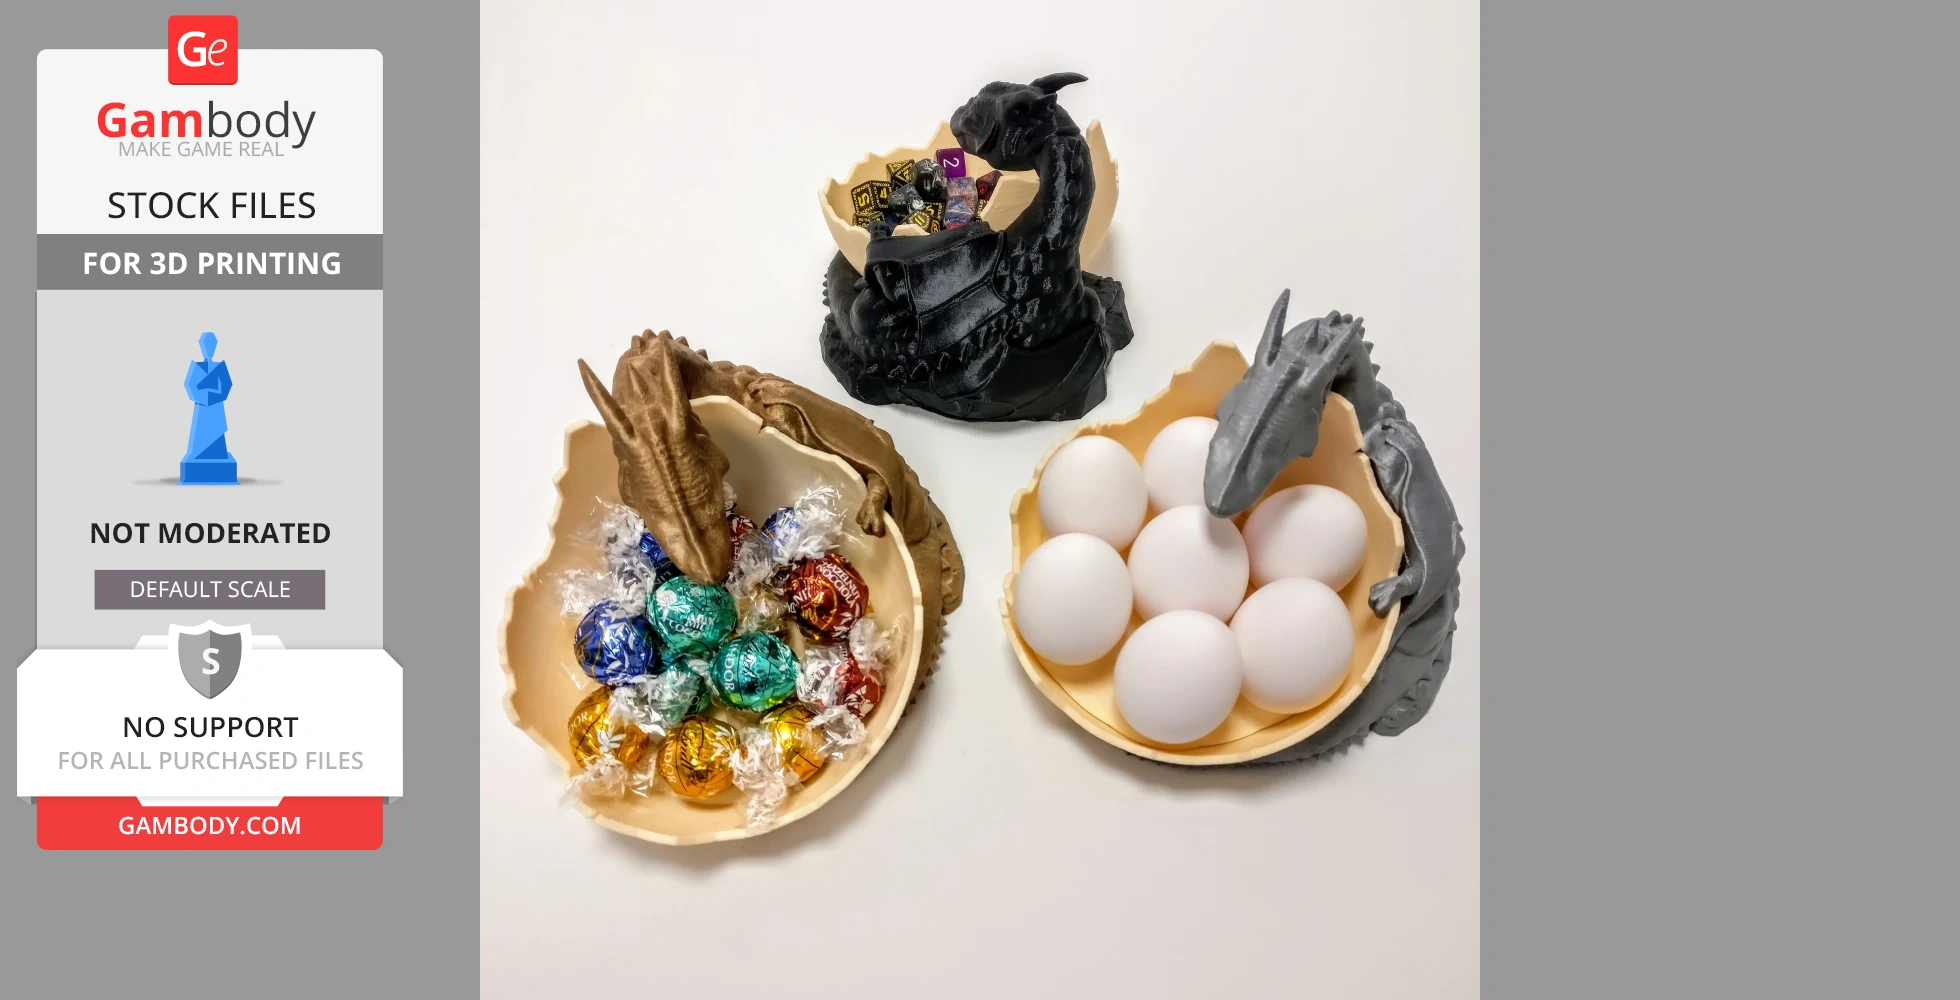 Buy Dragon Guarding Egg, Candy or Dice